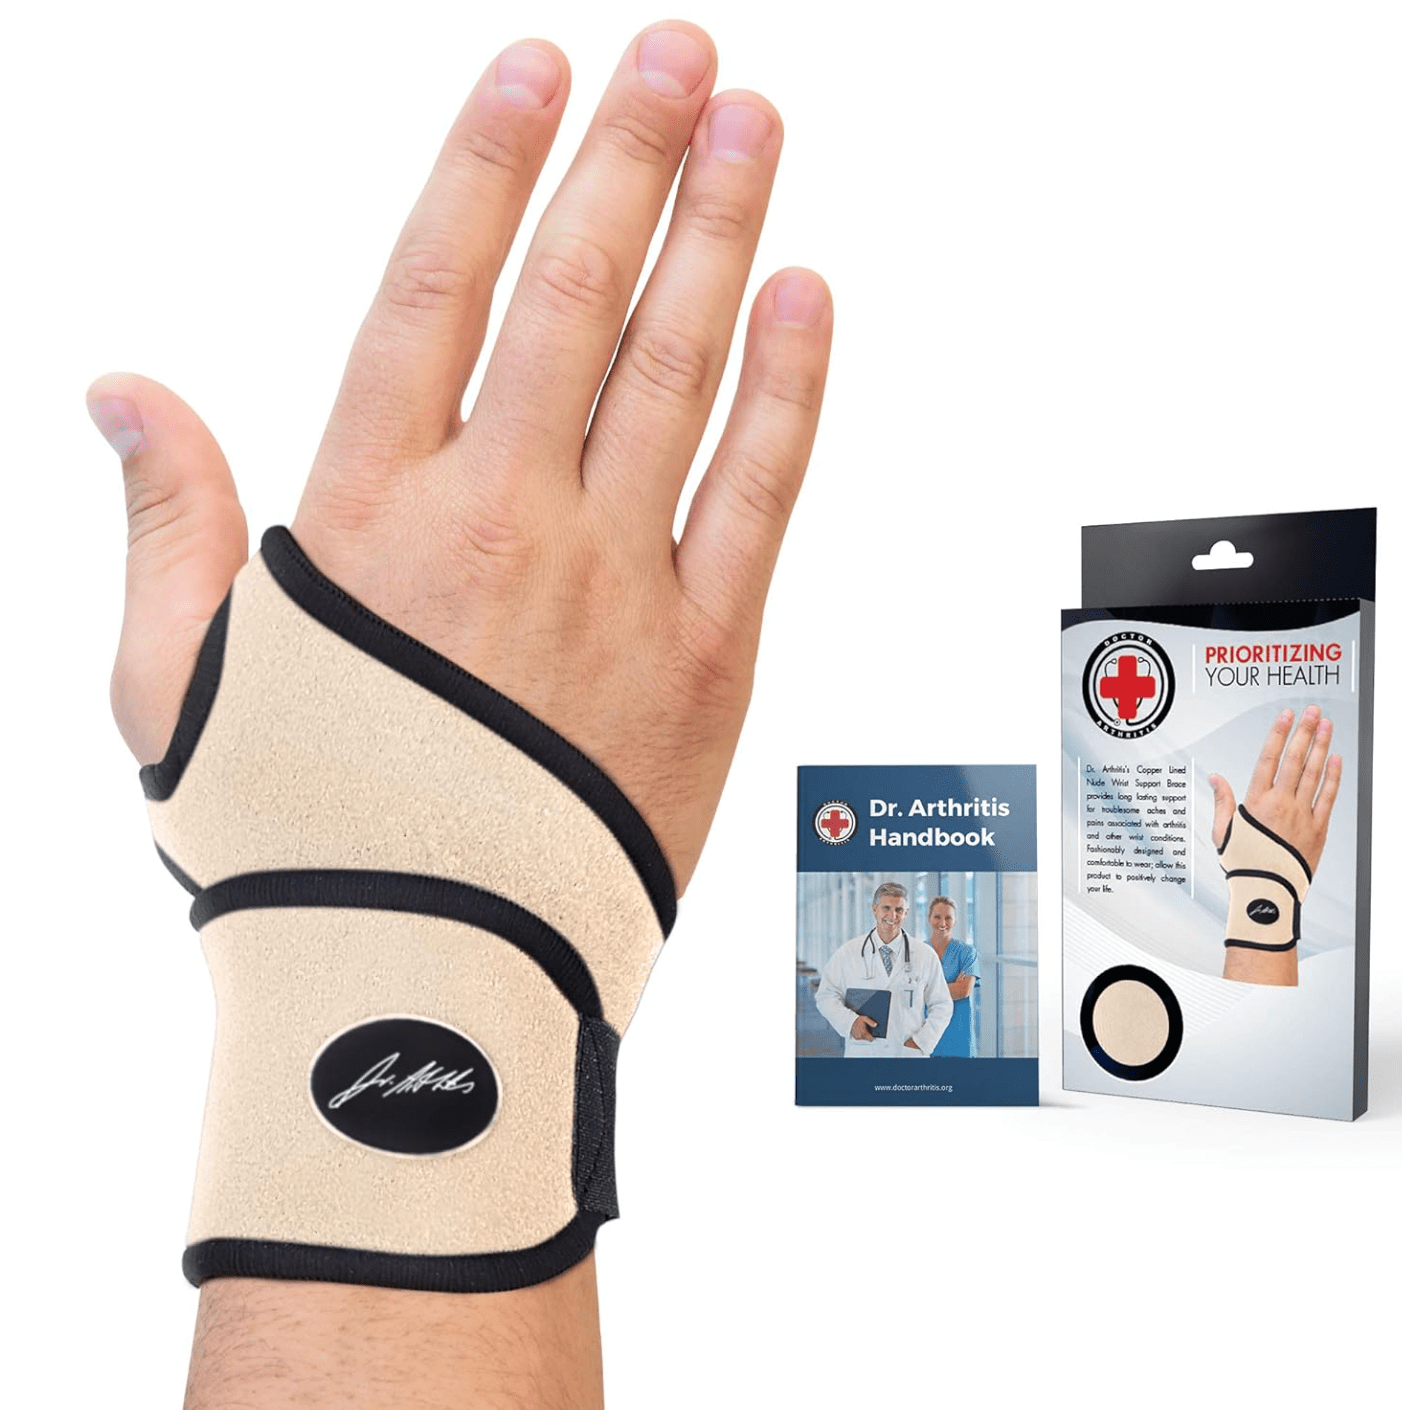 Best carpal tunnel brace for everyday use and sleeping